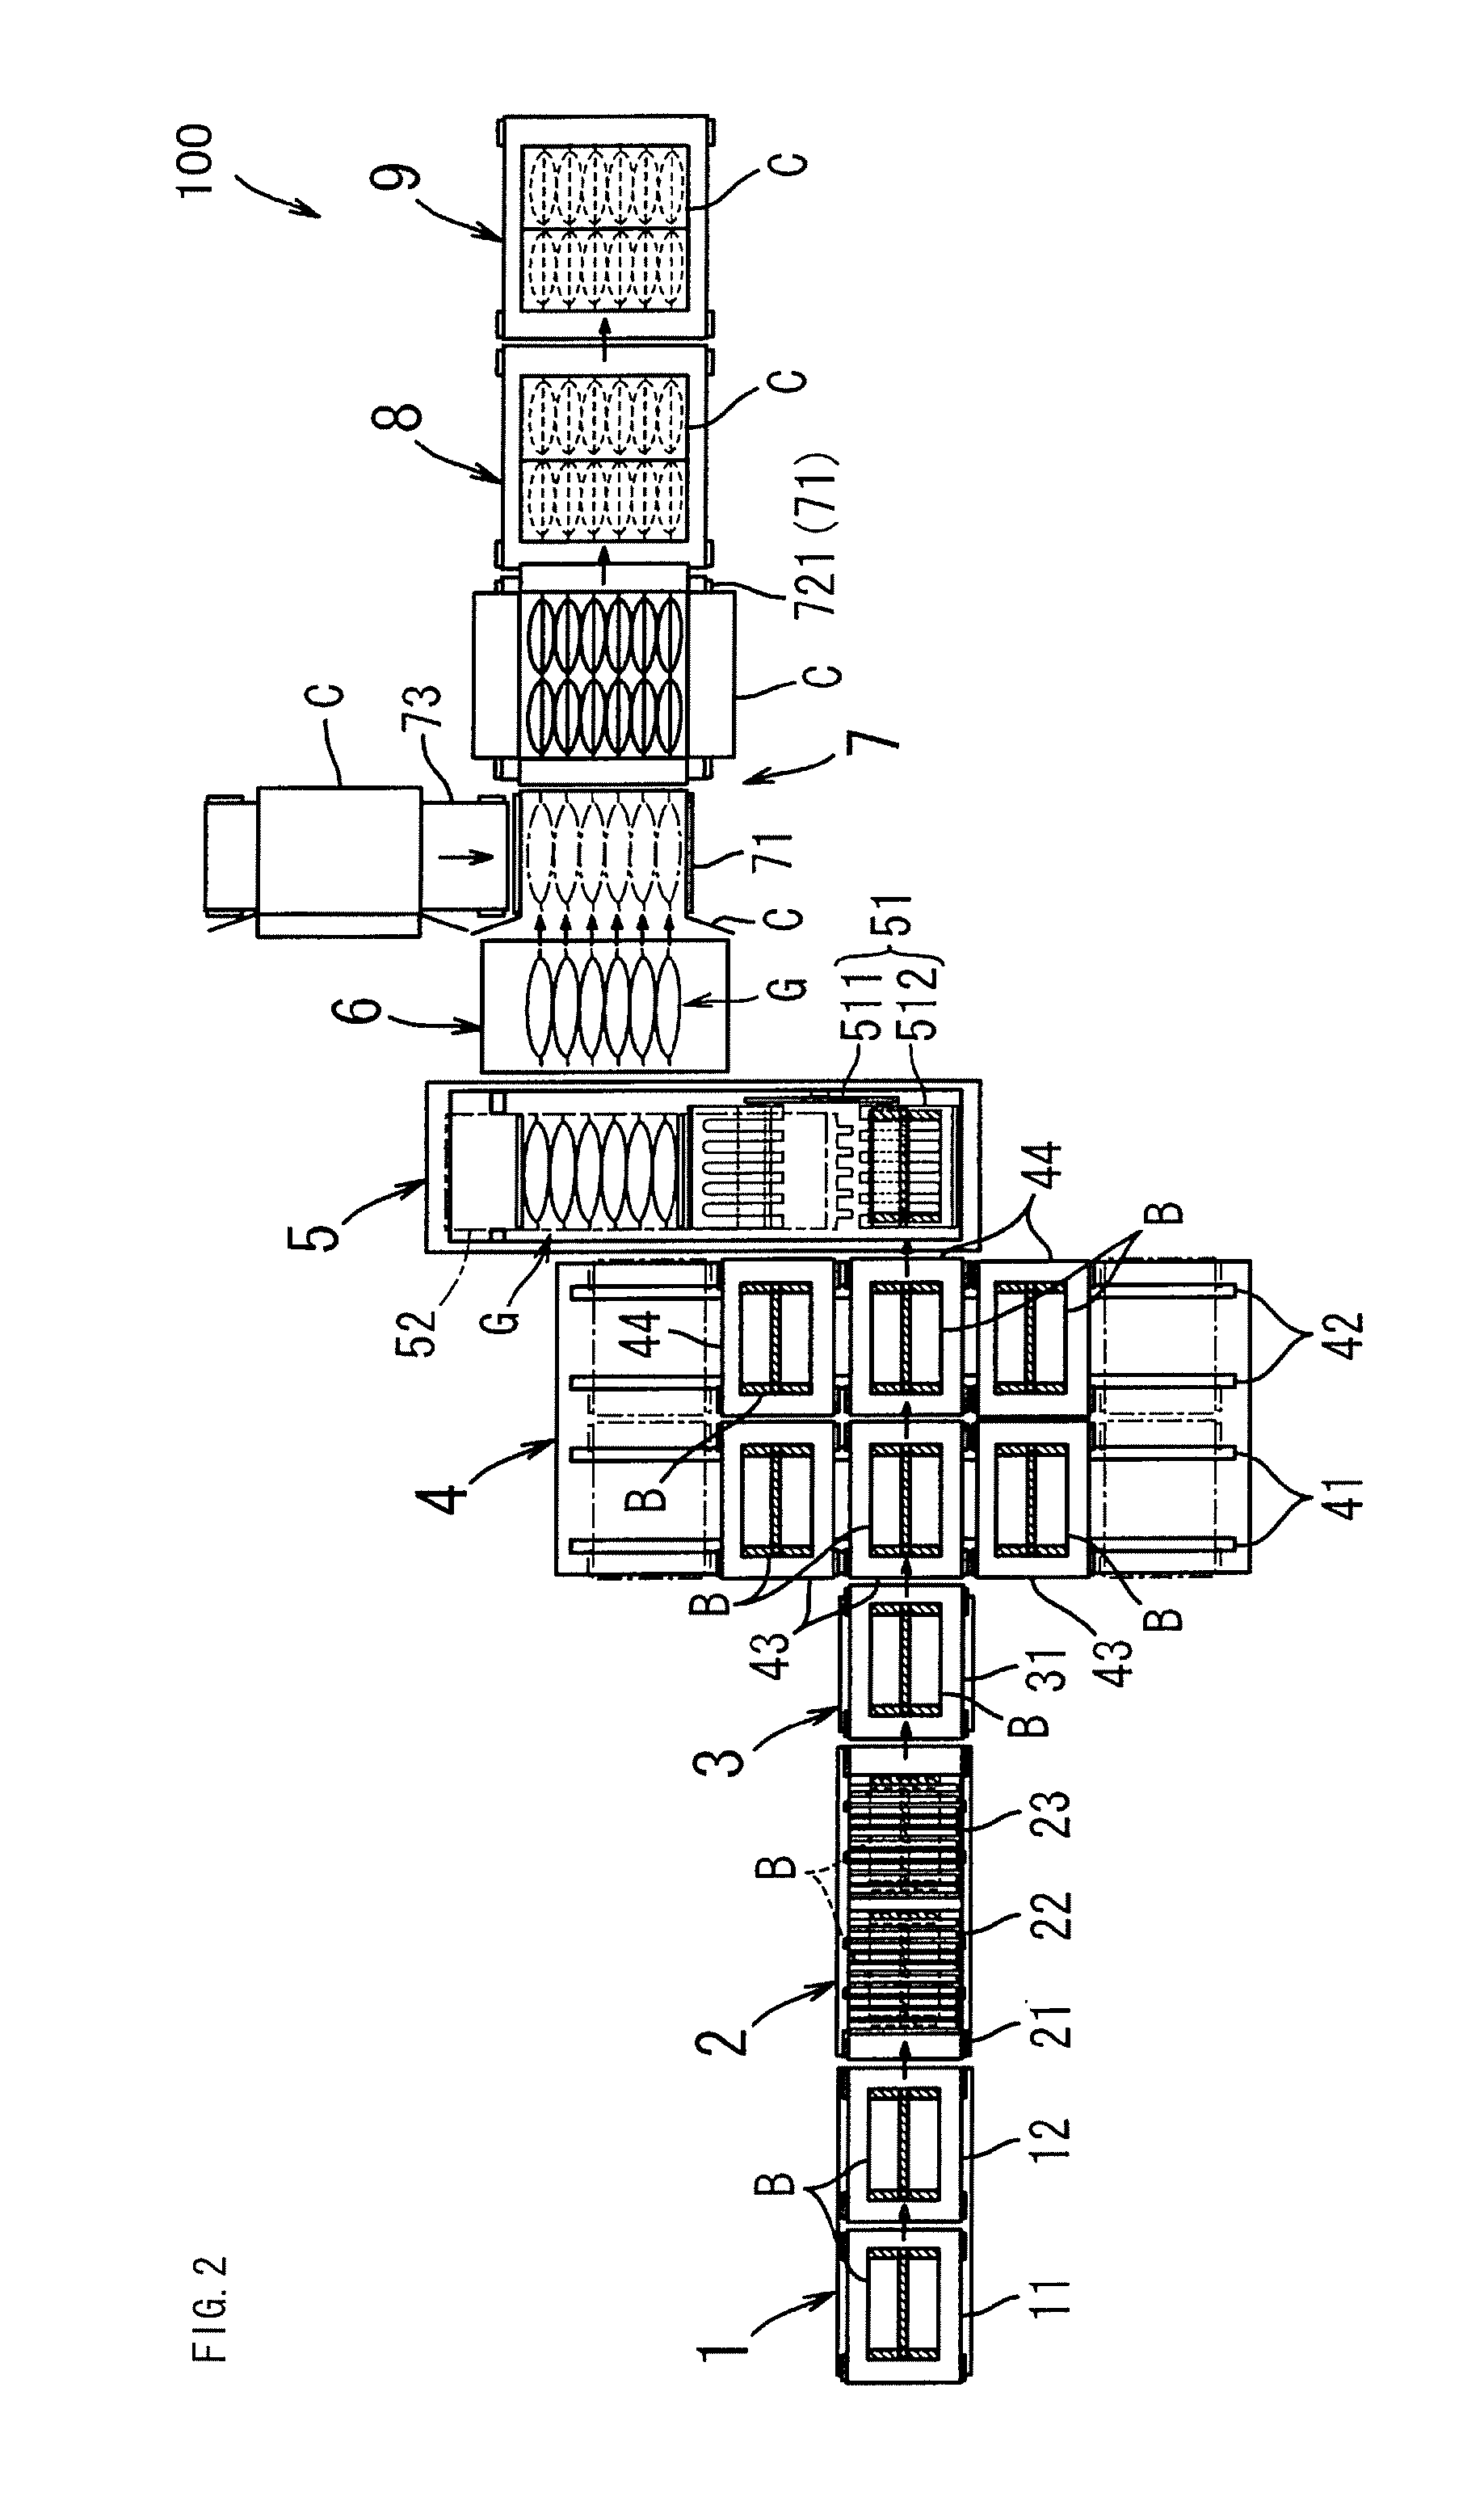 Boxing device and packaging device